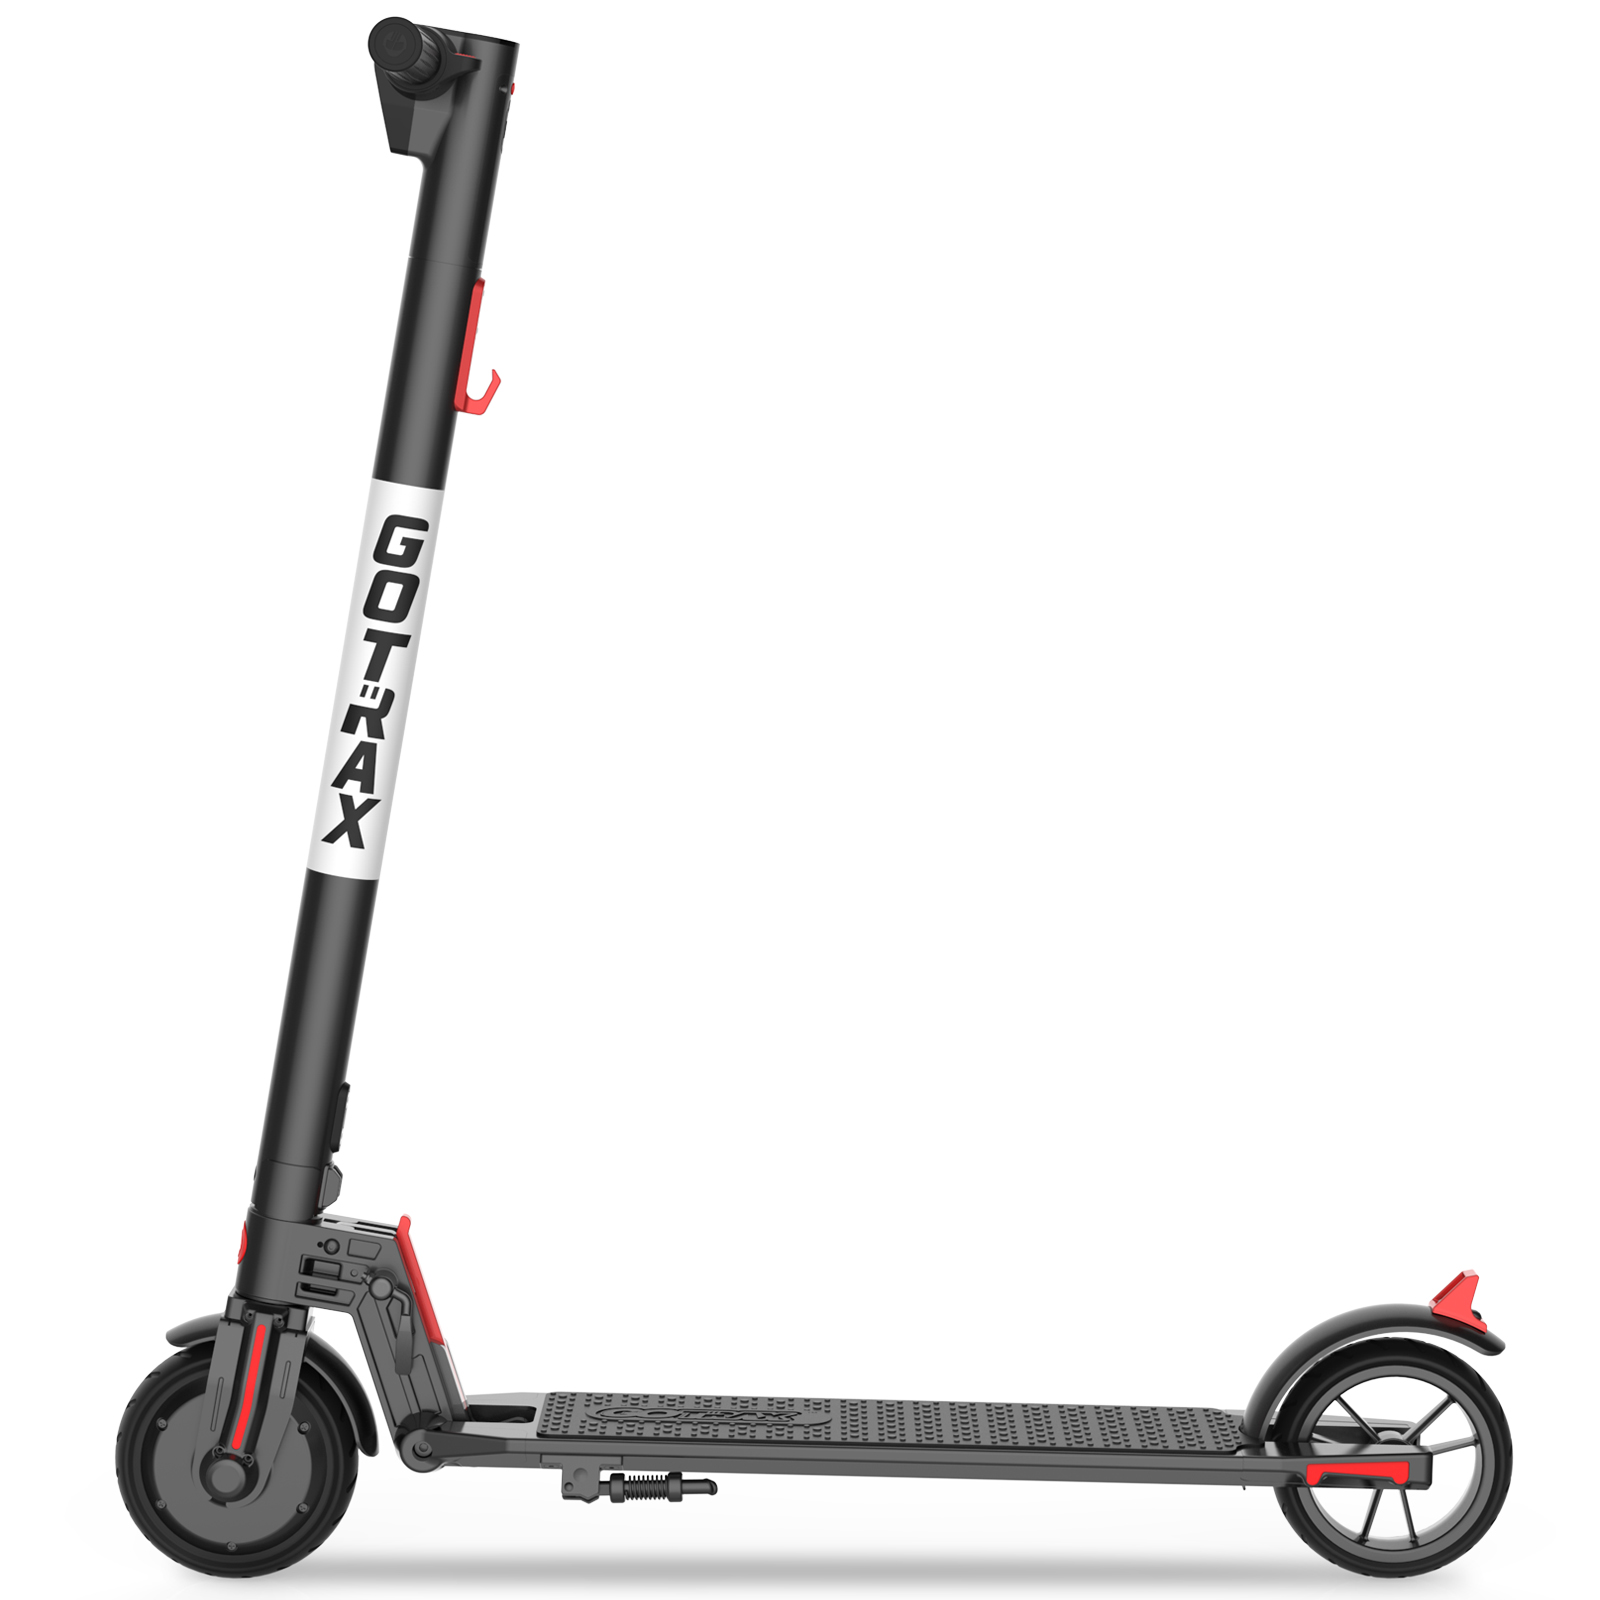 GOTRAX G2 Foldable Electric Scooter for Teens Age of 8+ with 6.5" Solid Tires 200W up 15.5mph, Black - image 1 of 8